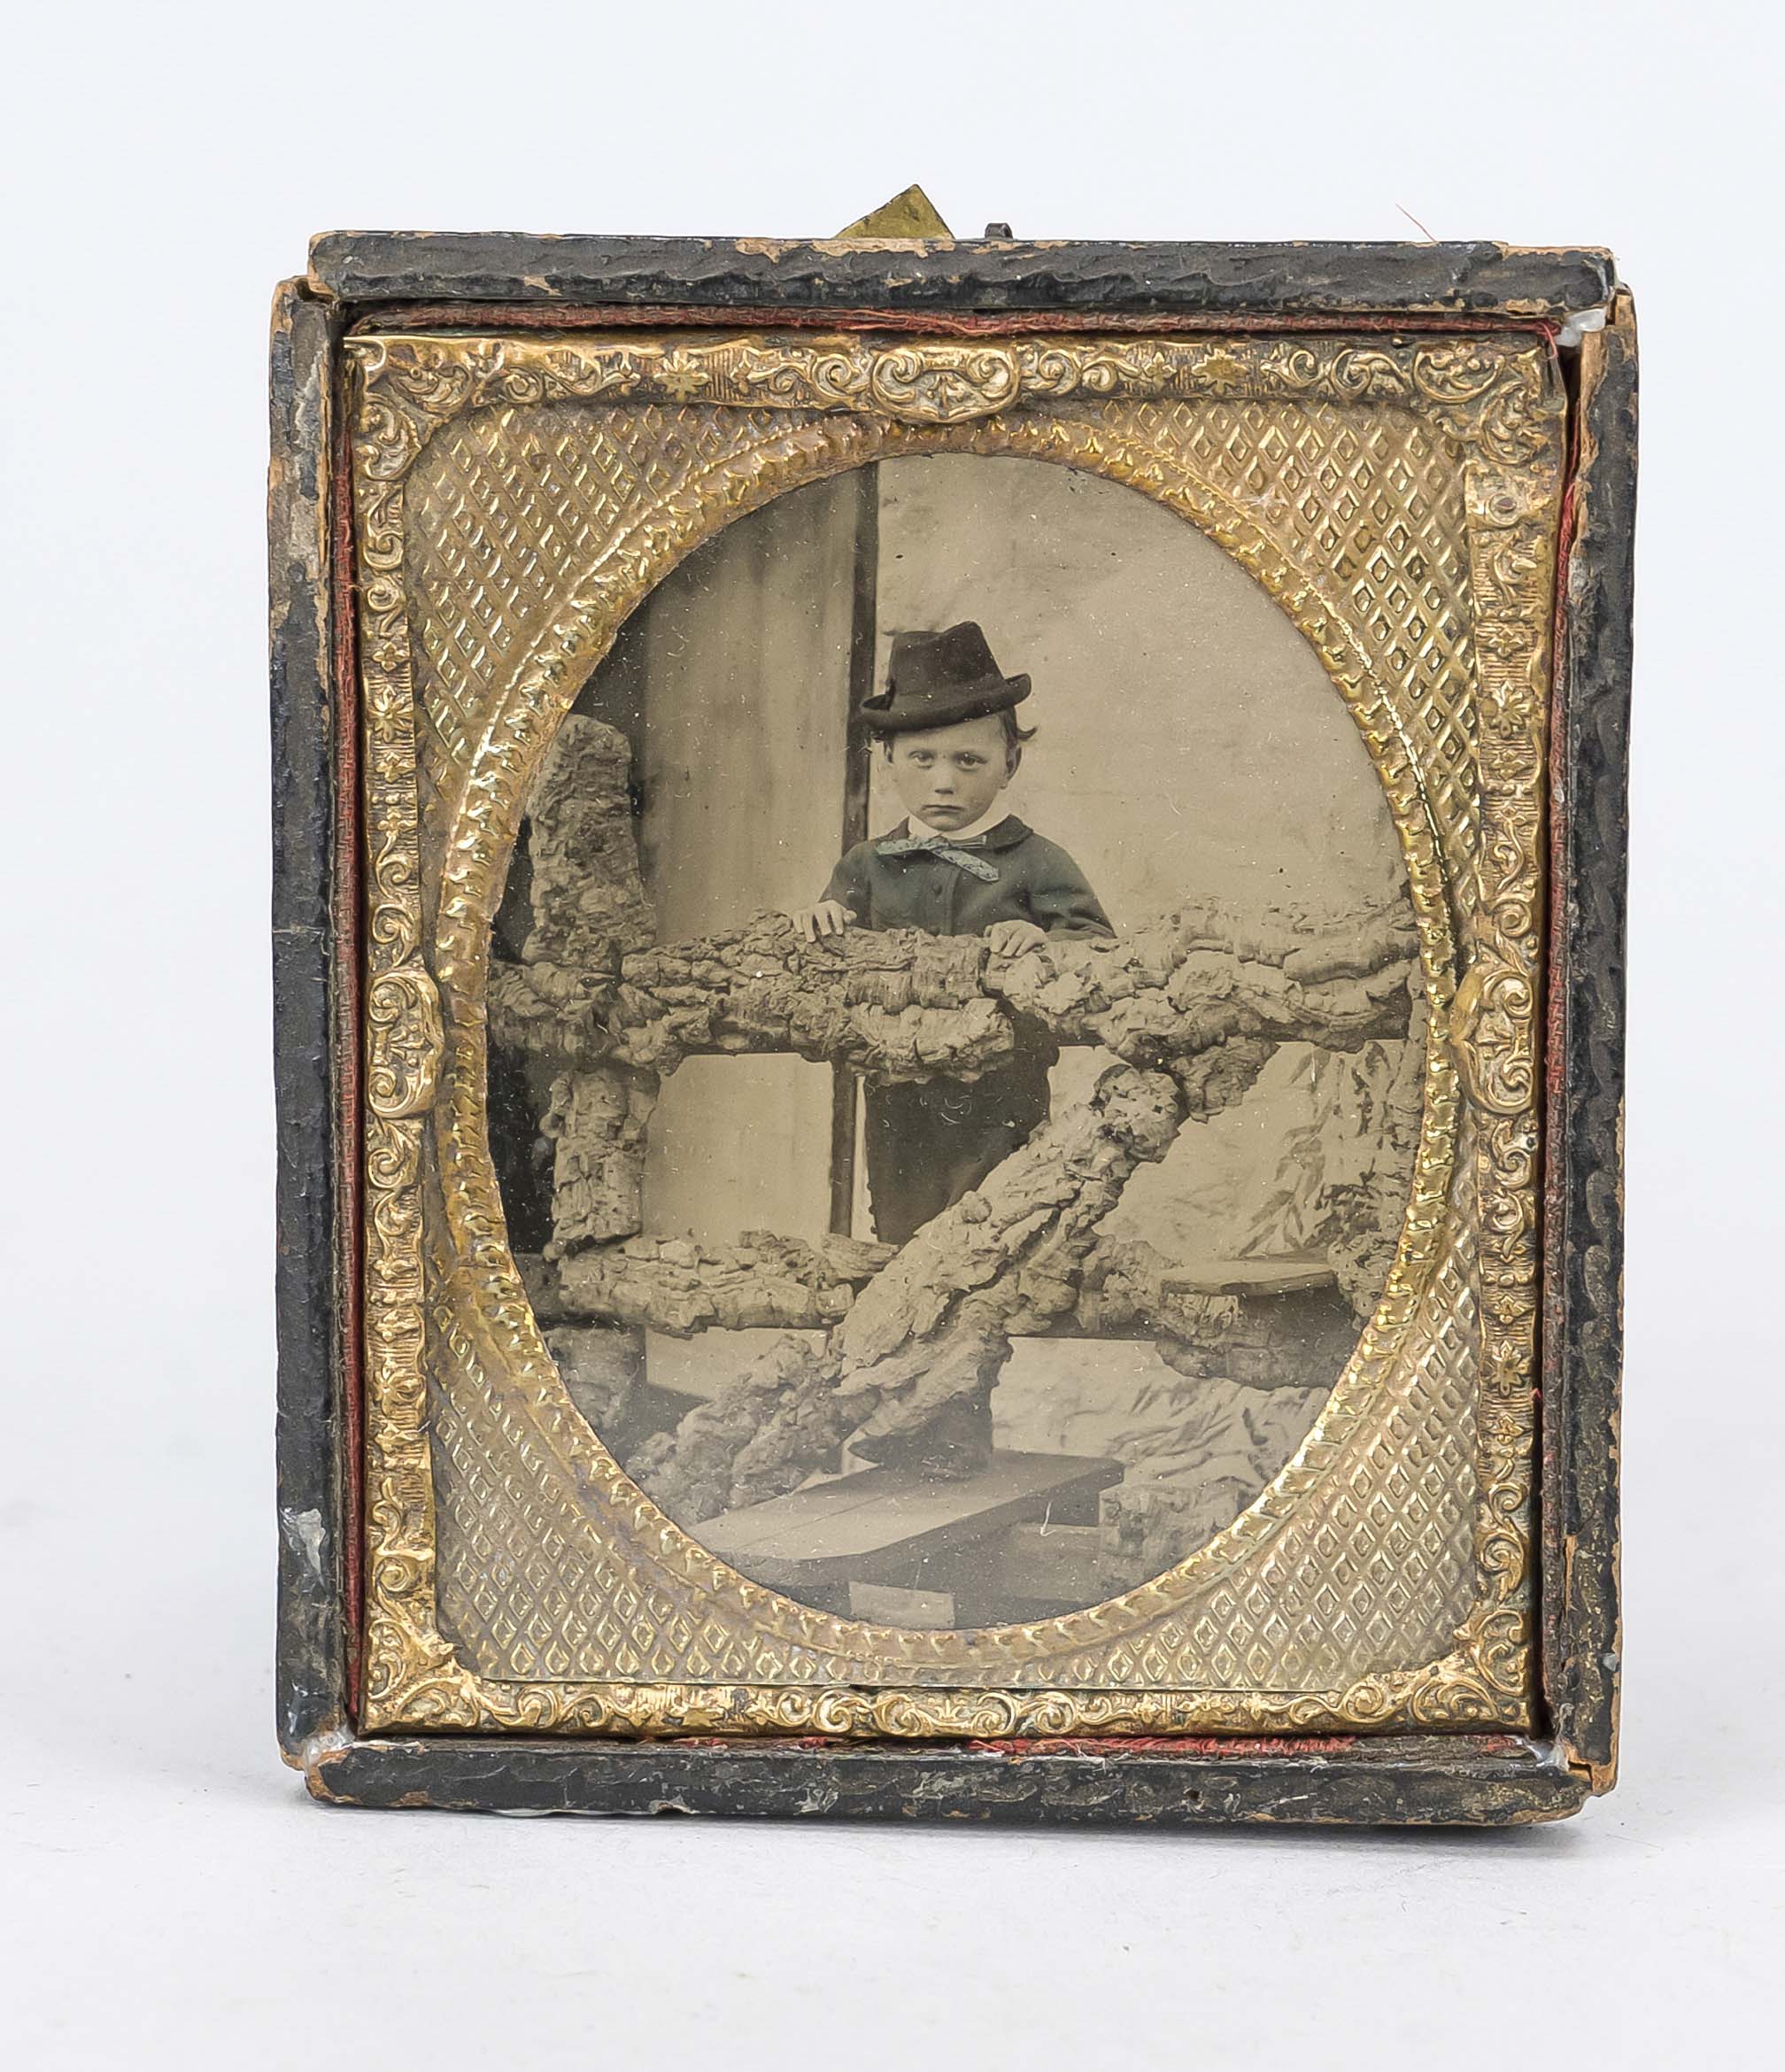 Daguerreotype, 2nd half 19th century Portrait of a boy with hat in front of a wooden gate (?),